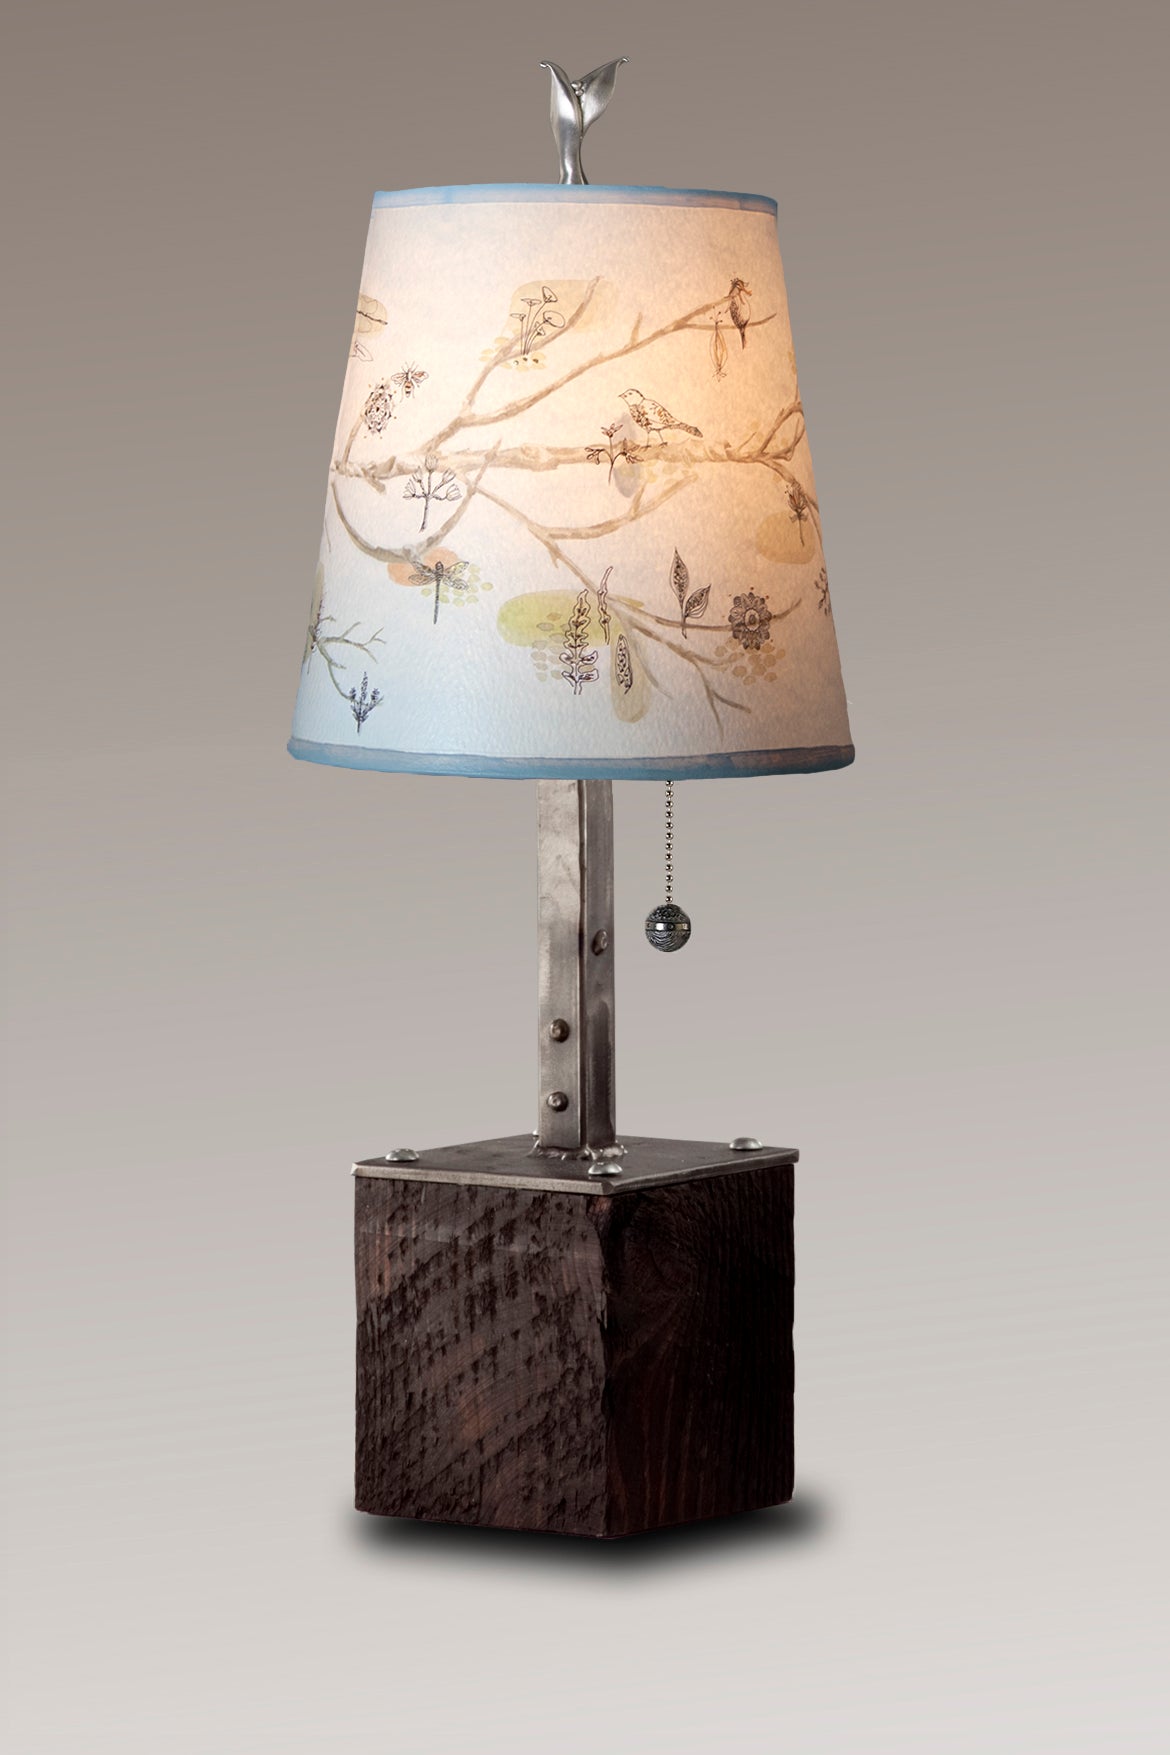 Steel Table Lamp on Reclaimed Wood with Small Drum Shade in Artful Branch